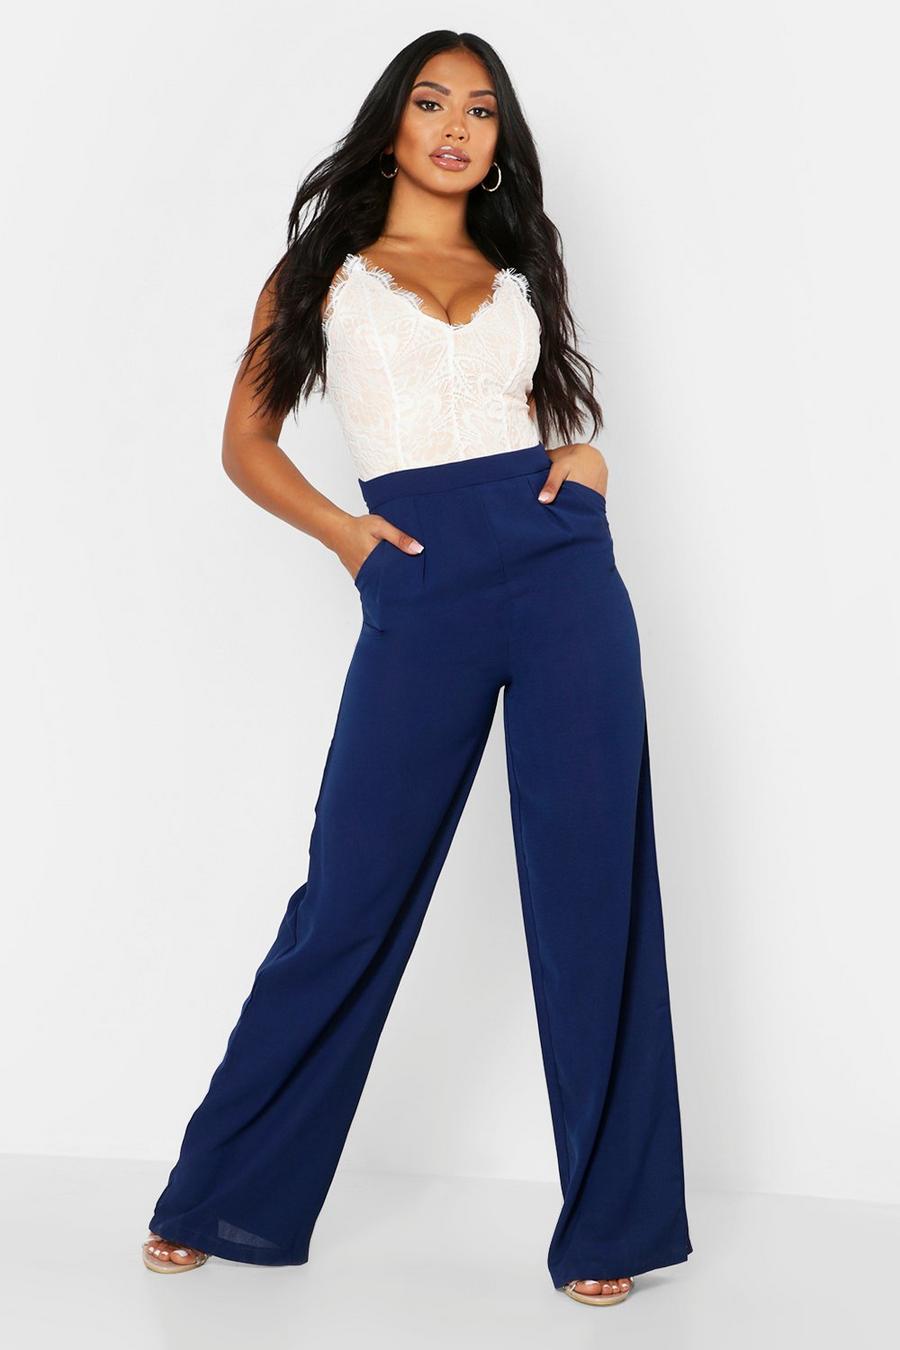 Navy Lace Body Insert Jumpsuit image number 1